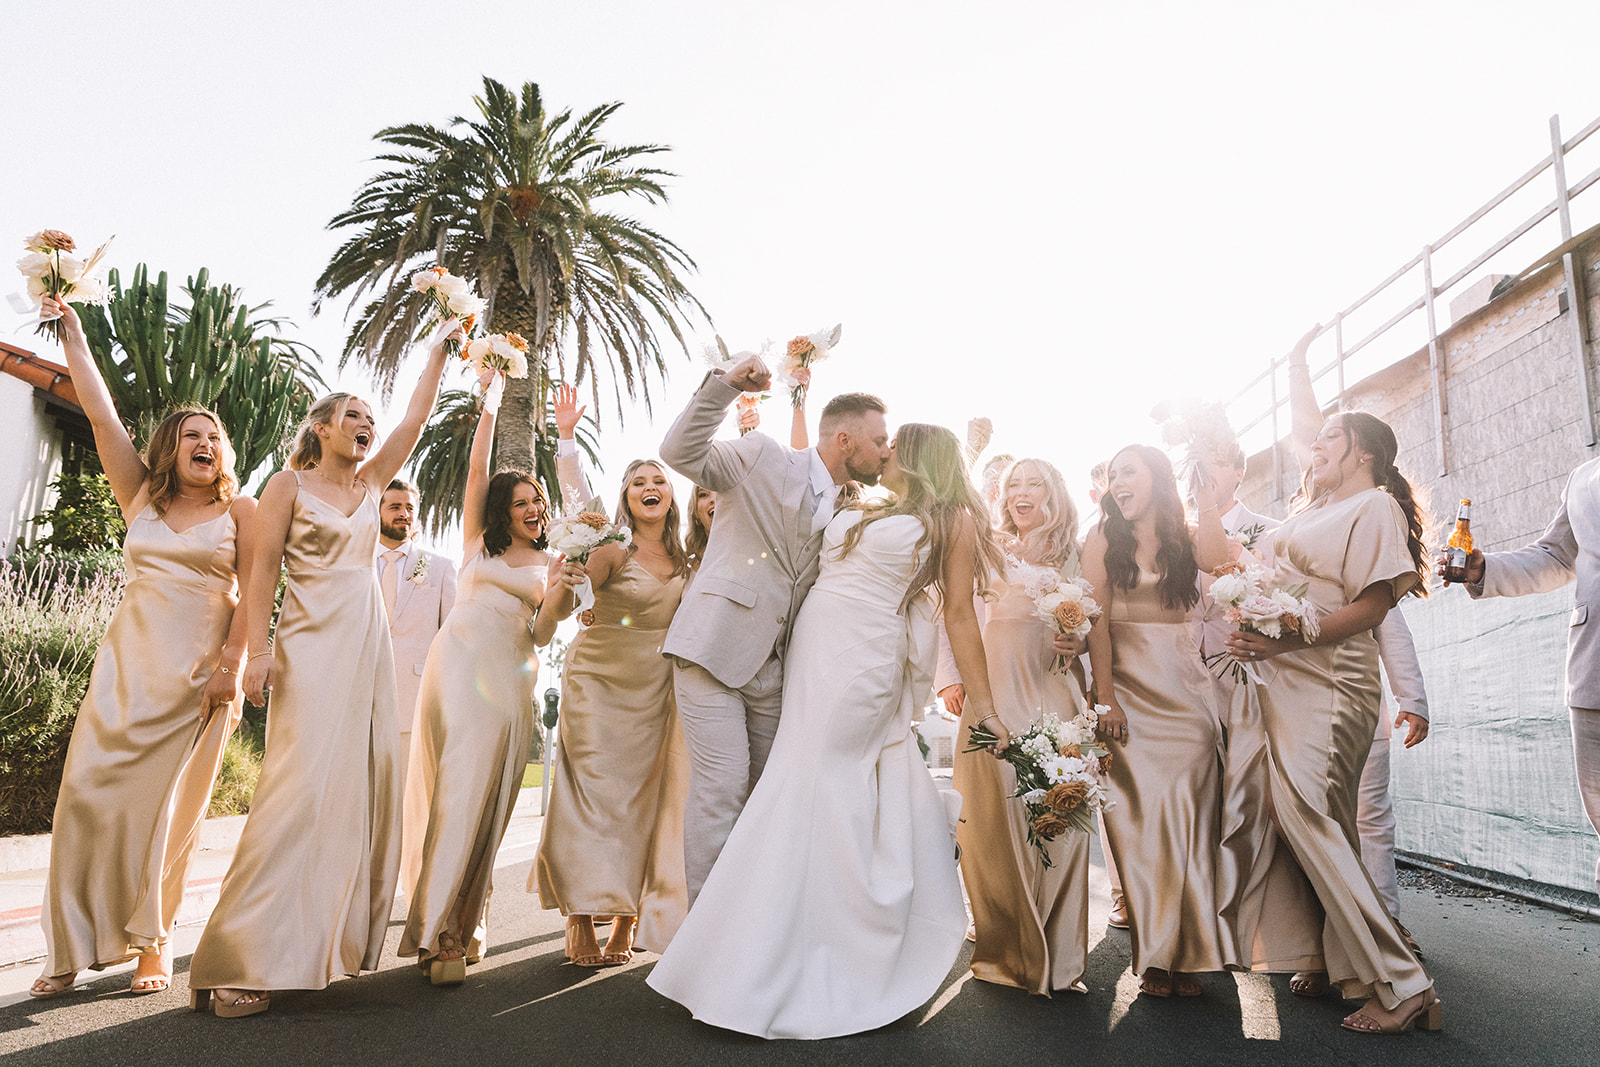 Untraditional, unstuffy, bridal party portraits at this beach wedding at the Orange County wedding venue. 